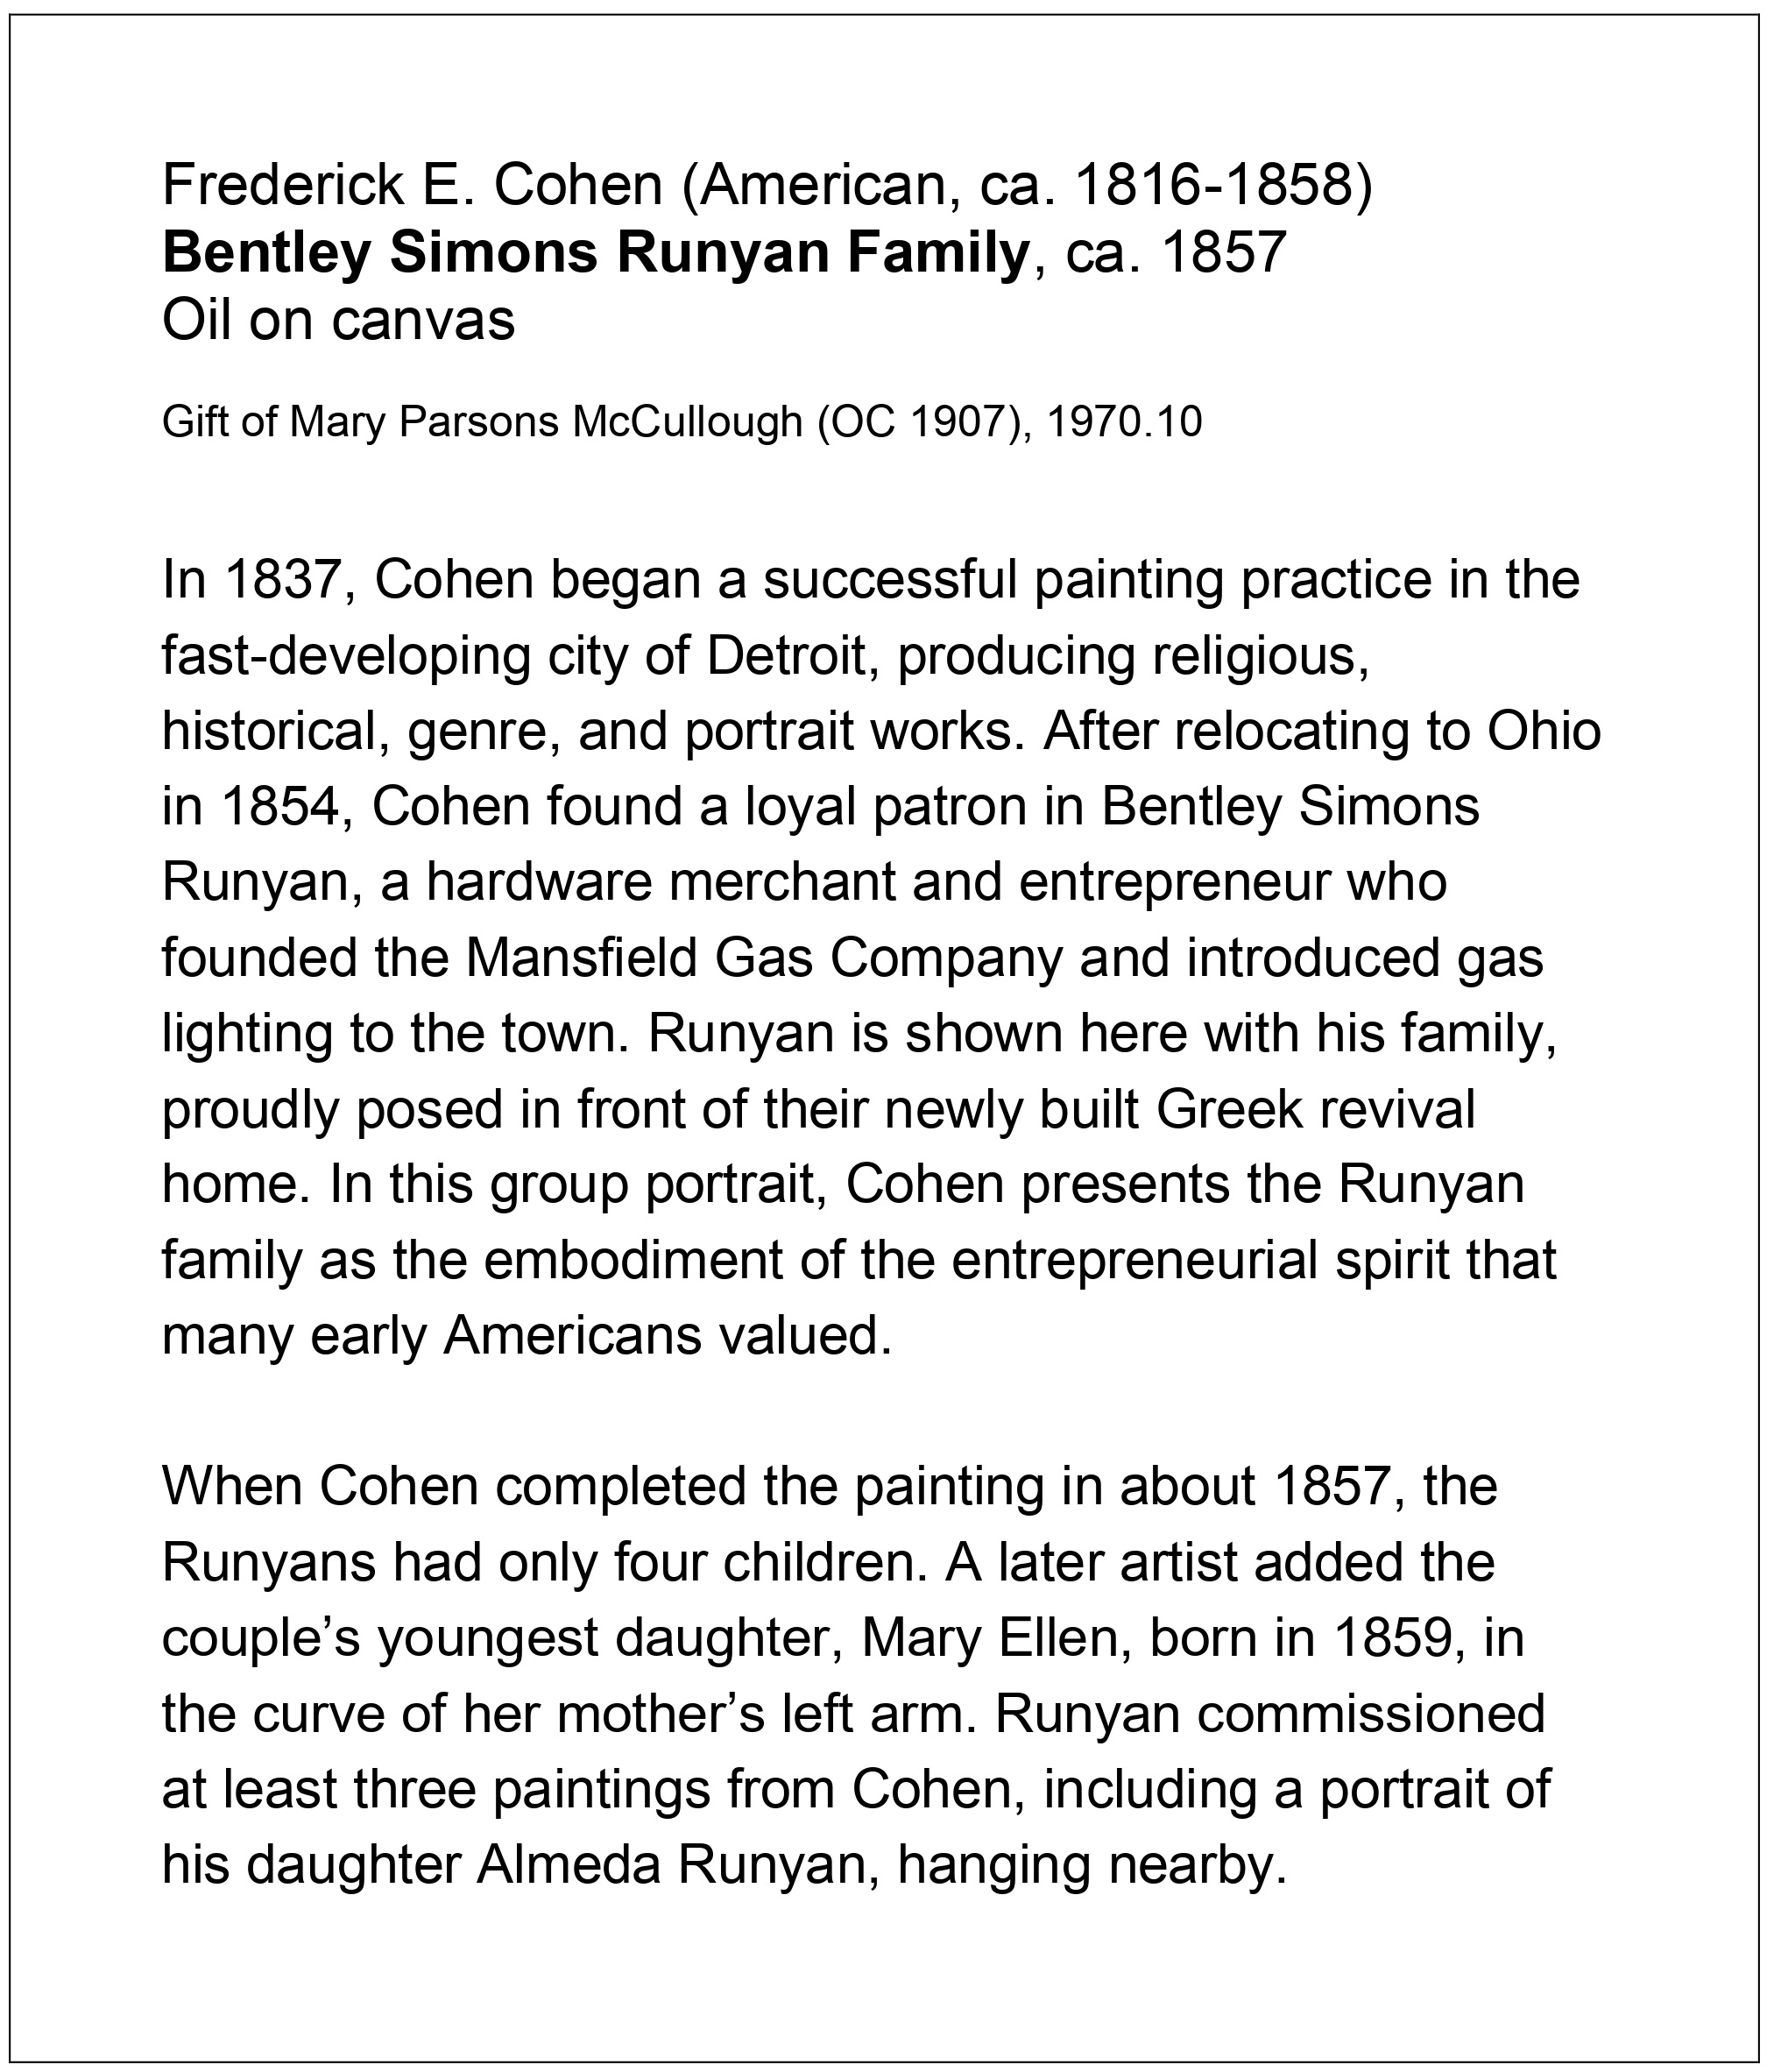 Formatted label text for fig. 1, which reads:Frederick E. Cohen (American, ca. 1816-1858) Bentley Simons Runyan Family, ca. 1857 Oil on canvas Gift of Mary Parsons McCullough (OC 1907), 1970.10 In 1837, Cohen began a successful painting practice in the fast-developing city of Detroit, producing religious, historical, genre, and portrait works. After relocating to Ohio in 1854, Cohen found a loyal patron in Bentley Simons Runyan, a hardware merchant and entrepreneur who founded the Mansfield Gas Company and introduced gas lighting to the town. Runyan is shown here with his family, proudly posed in front of their newly built Greek revival home. In this group portrait, Cohen presents the Runyan family as the embodiment of the entrepreneurial spirit that many early Americans valued. When Cohen completed the painting in about 1857, the Runyans had only four children. A later artist added the couple’s youngest daughter, Mary Ellen, born in 1859, in the curve of her mother’s left arm. Runyan commissioned at least three paintings from Cohen, including a portrait of his daughter Almeda Runyan, hanging nearby.